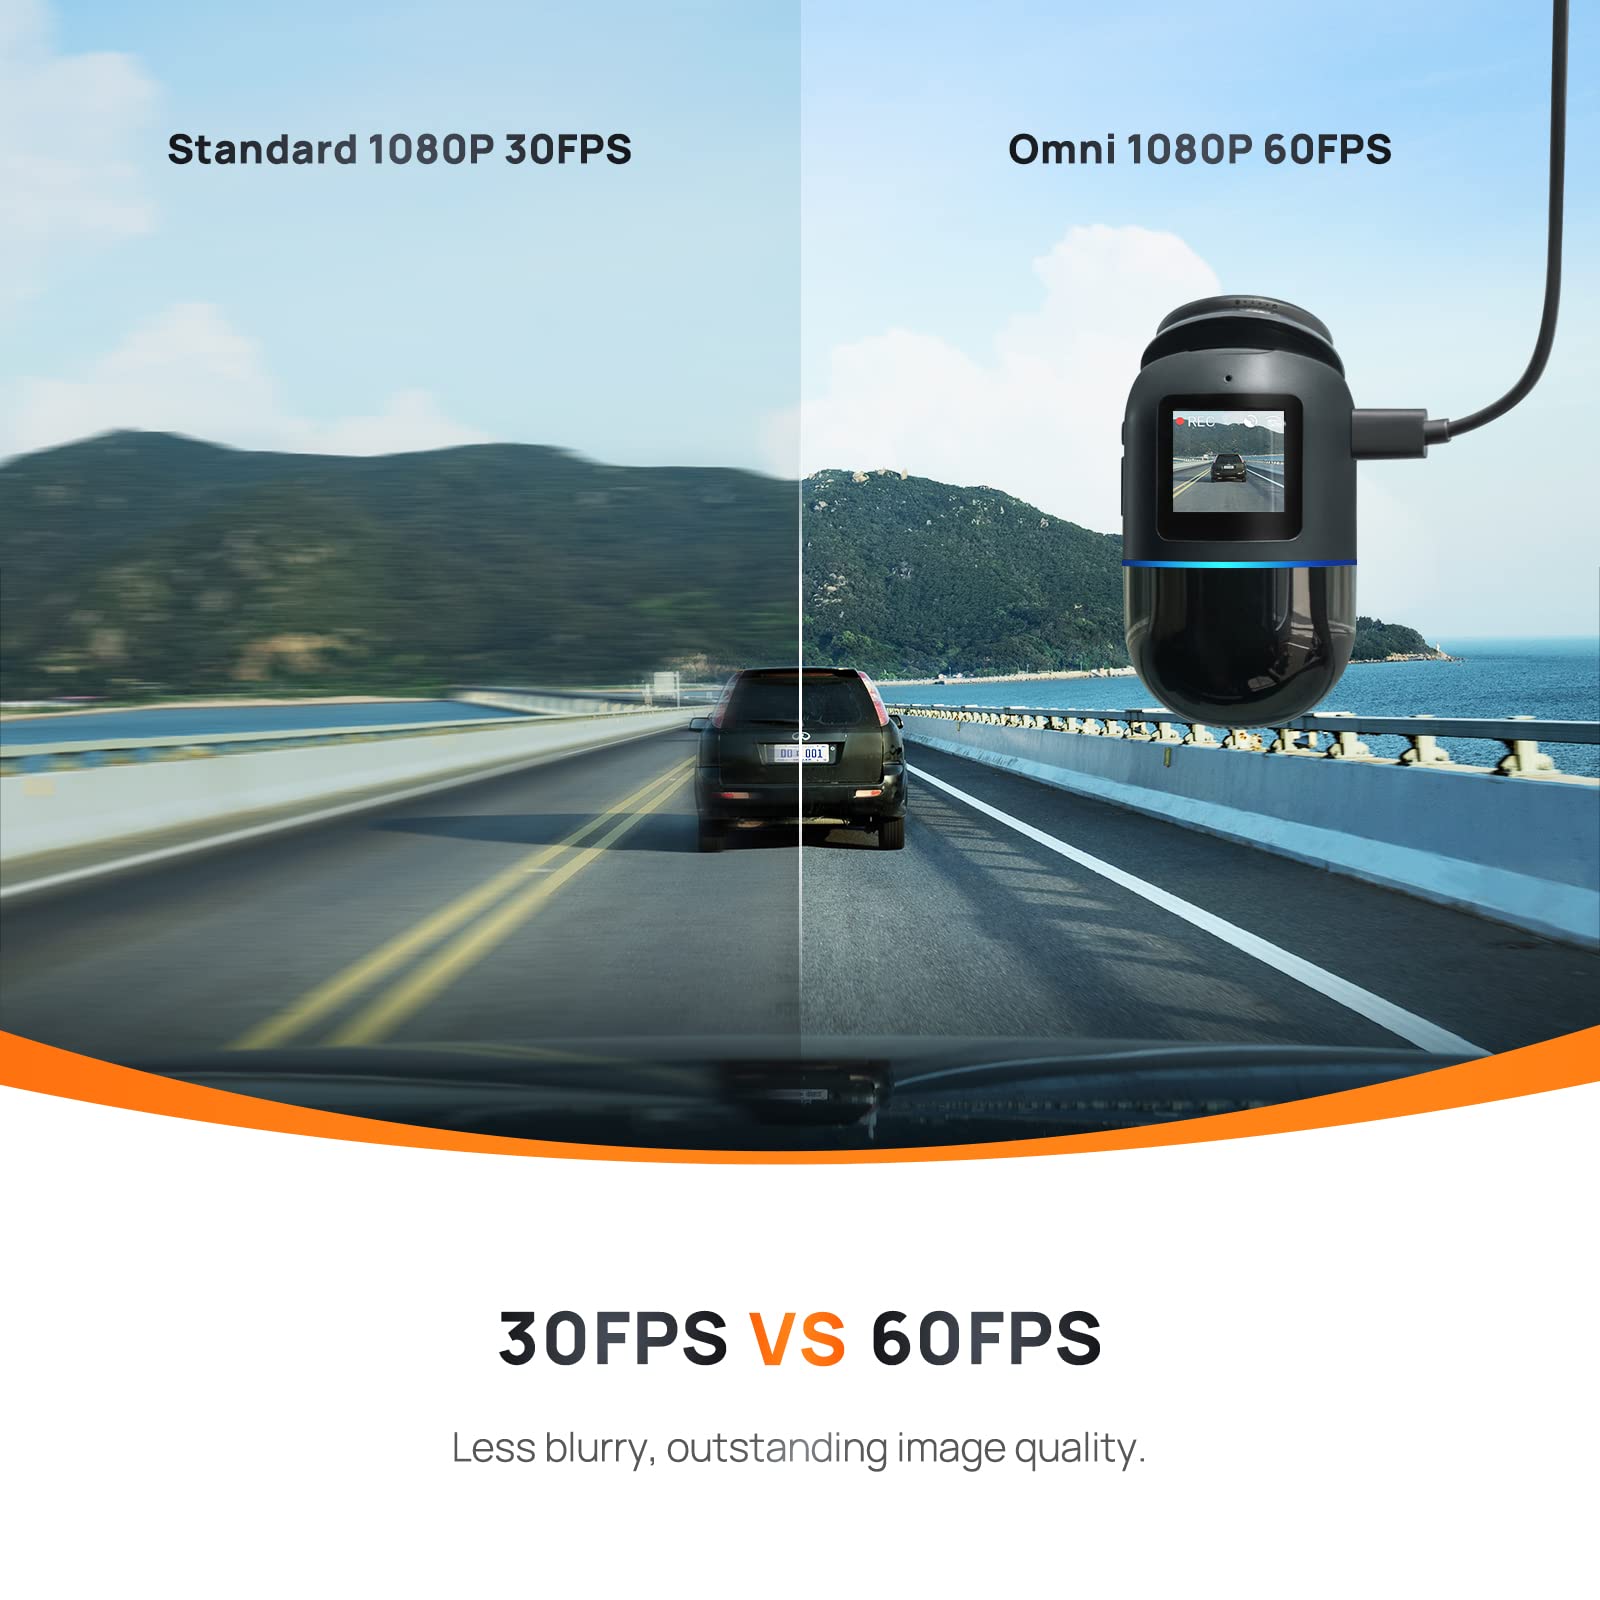 70mai Dash Cam Omni, 360° Rotating, Superior Night Vision,Built-in 128GB eMMC Storage, Time-Lapse Recording, 24H Parking Mode, AI Motion Detection, 1080P Full HD, Built-in GPS, App Control